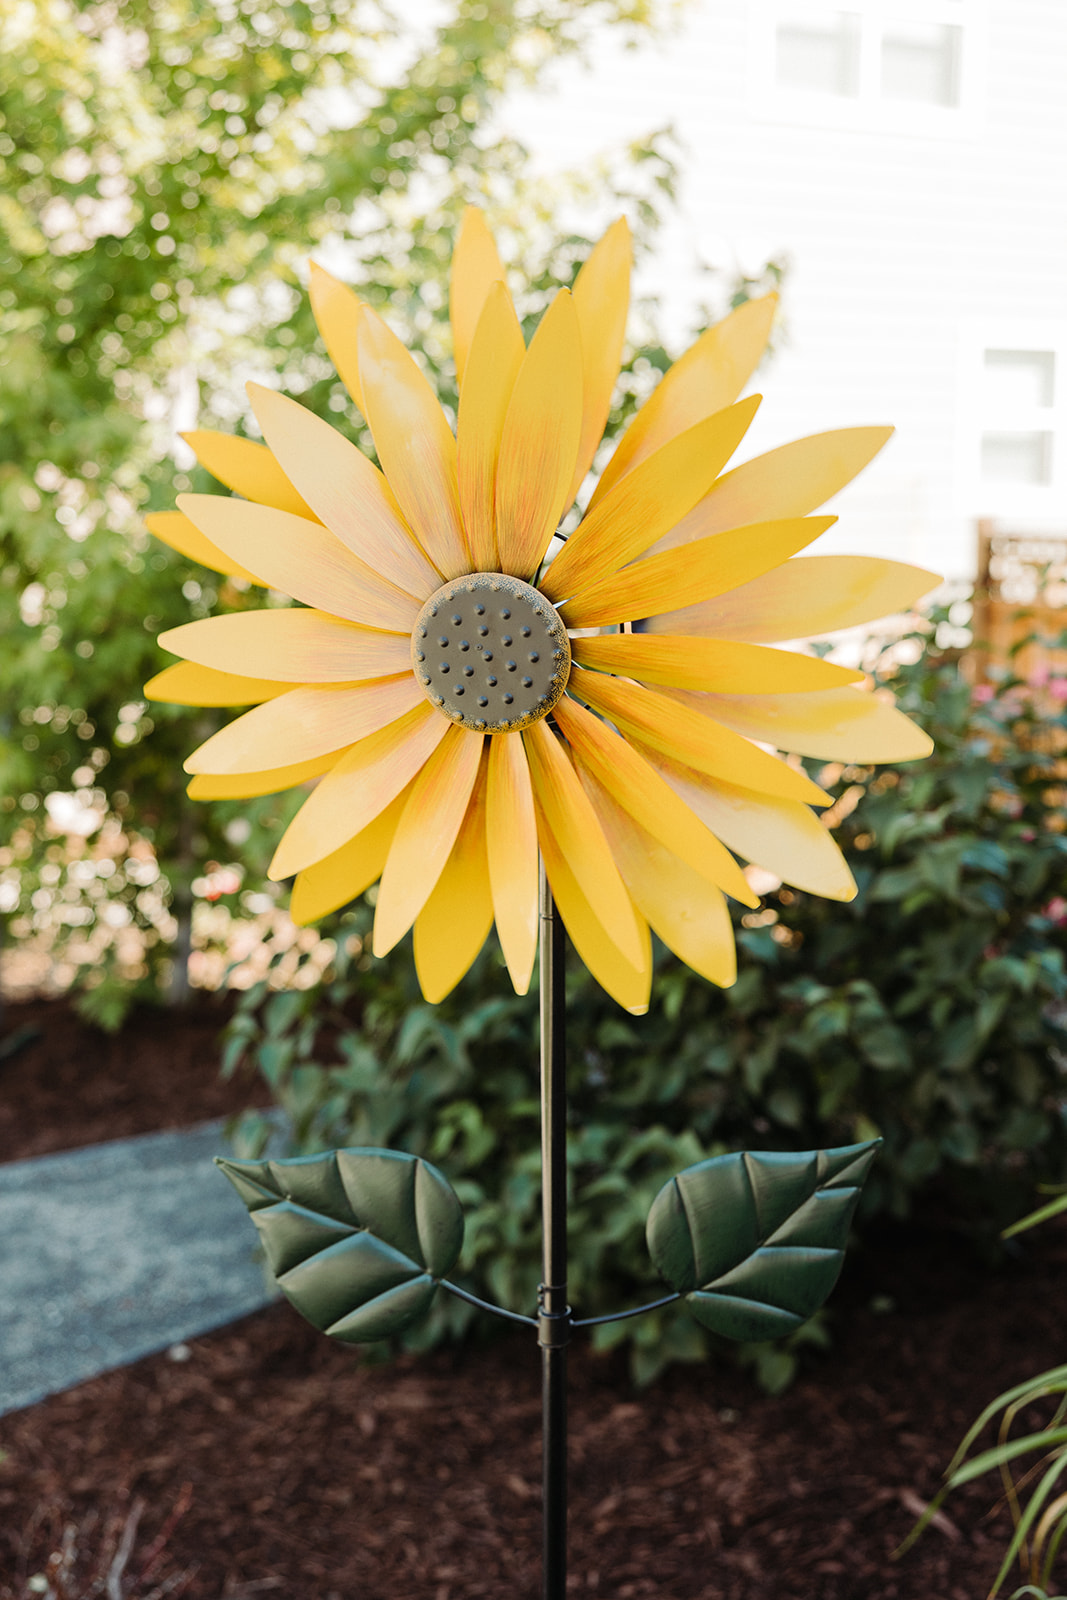 A metal sunflower that's petals blow in the wind; a bright yellow garden decoration on a sunny day.